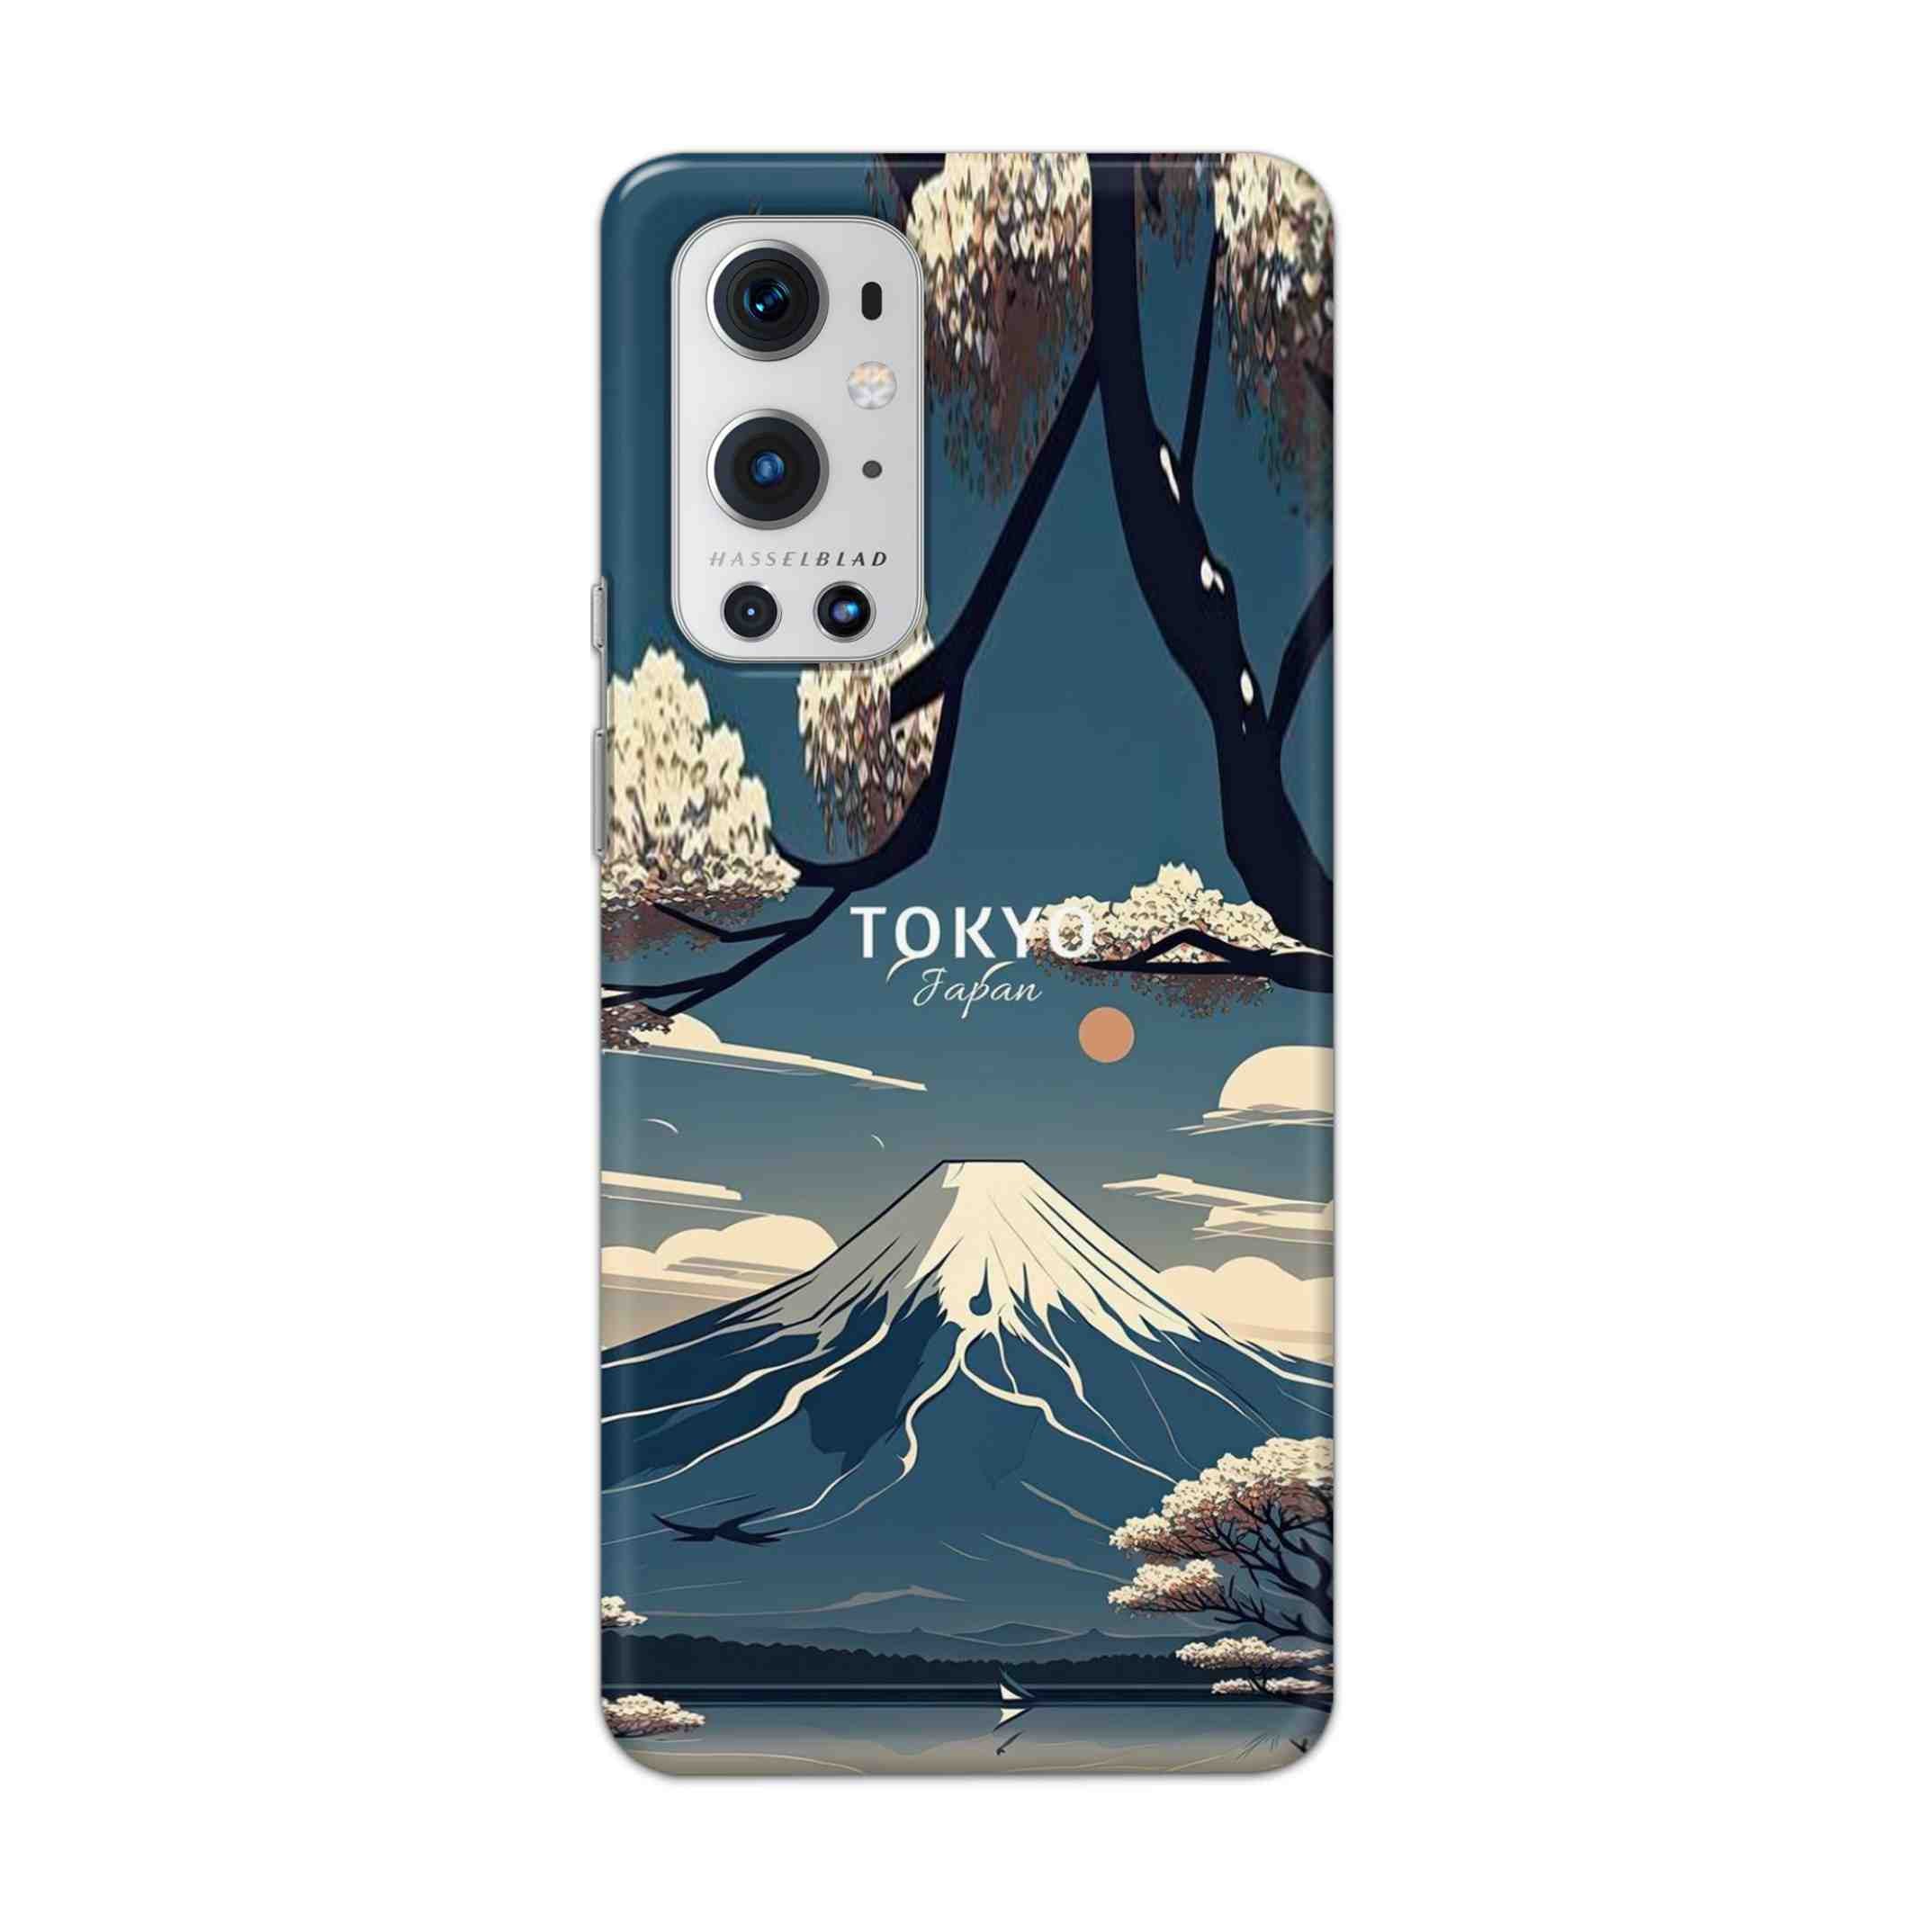 Buy Tokyo Hard Back Mobile Phone Case Cover For OnePlus 9 Pro Online